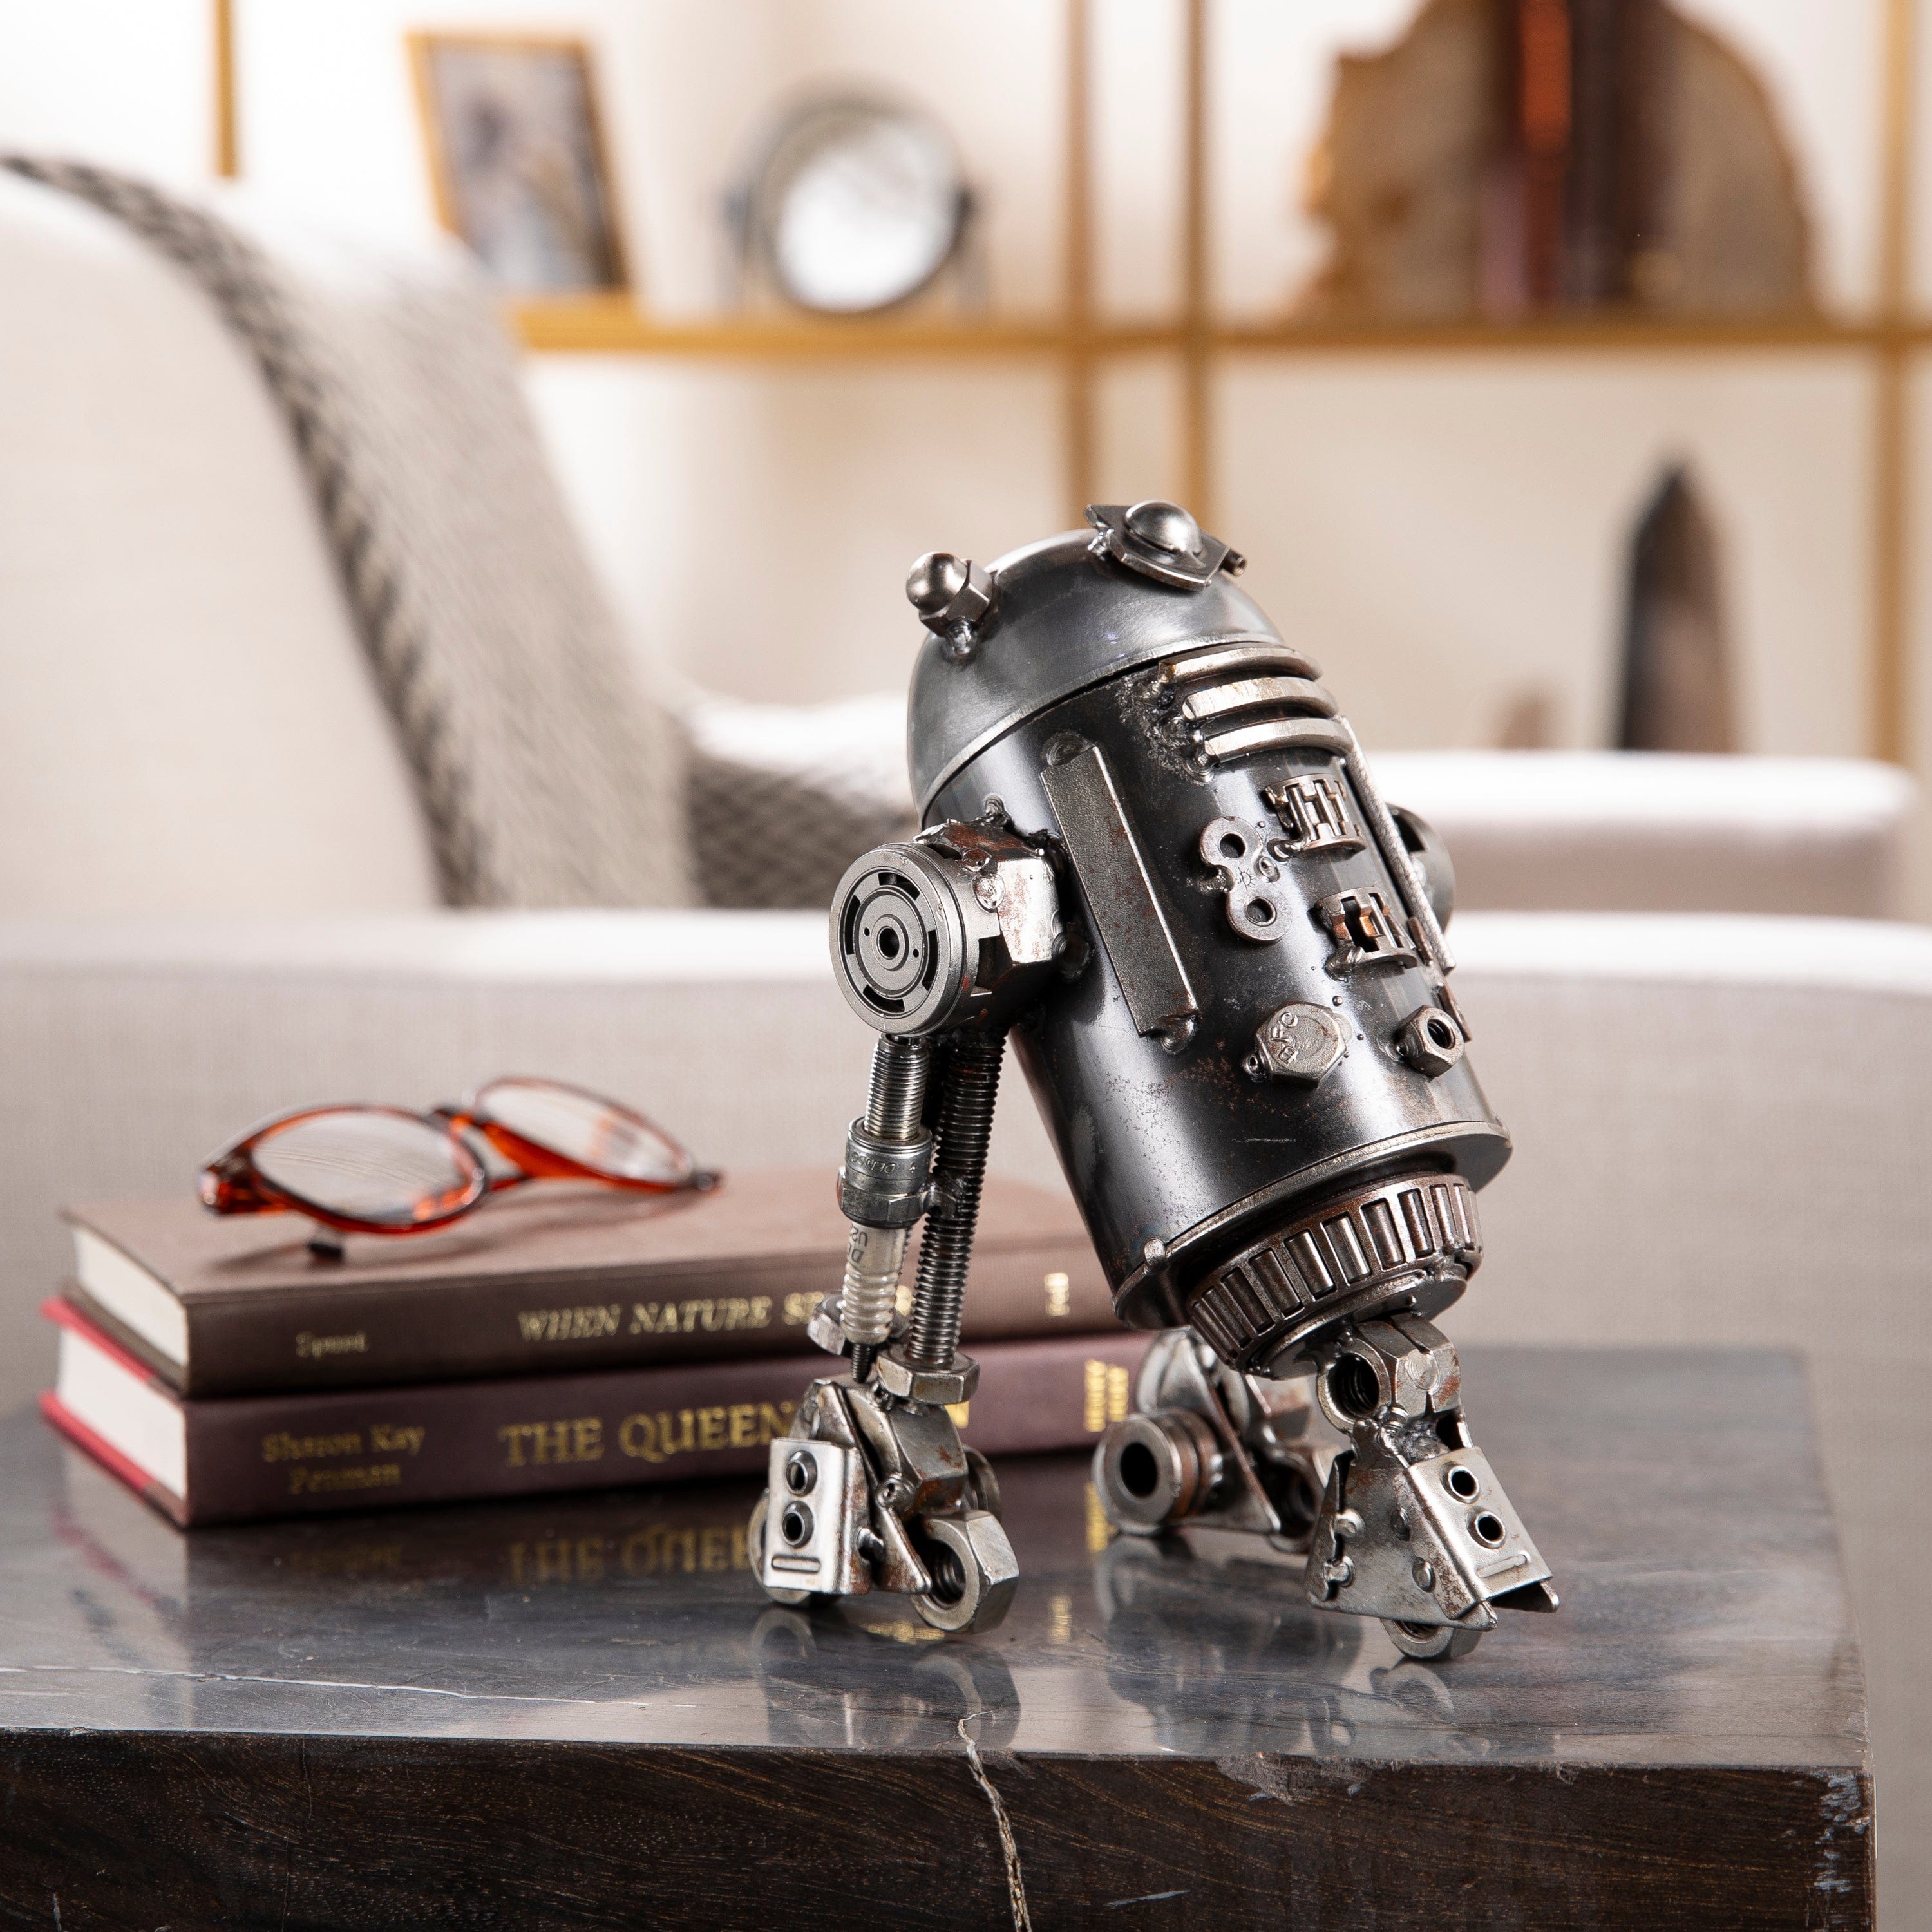 Kalifano Recycled Metal Art R2D2 Inspired Recycled Metal Sculpture RMS-450R2-N